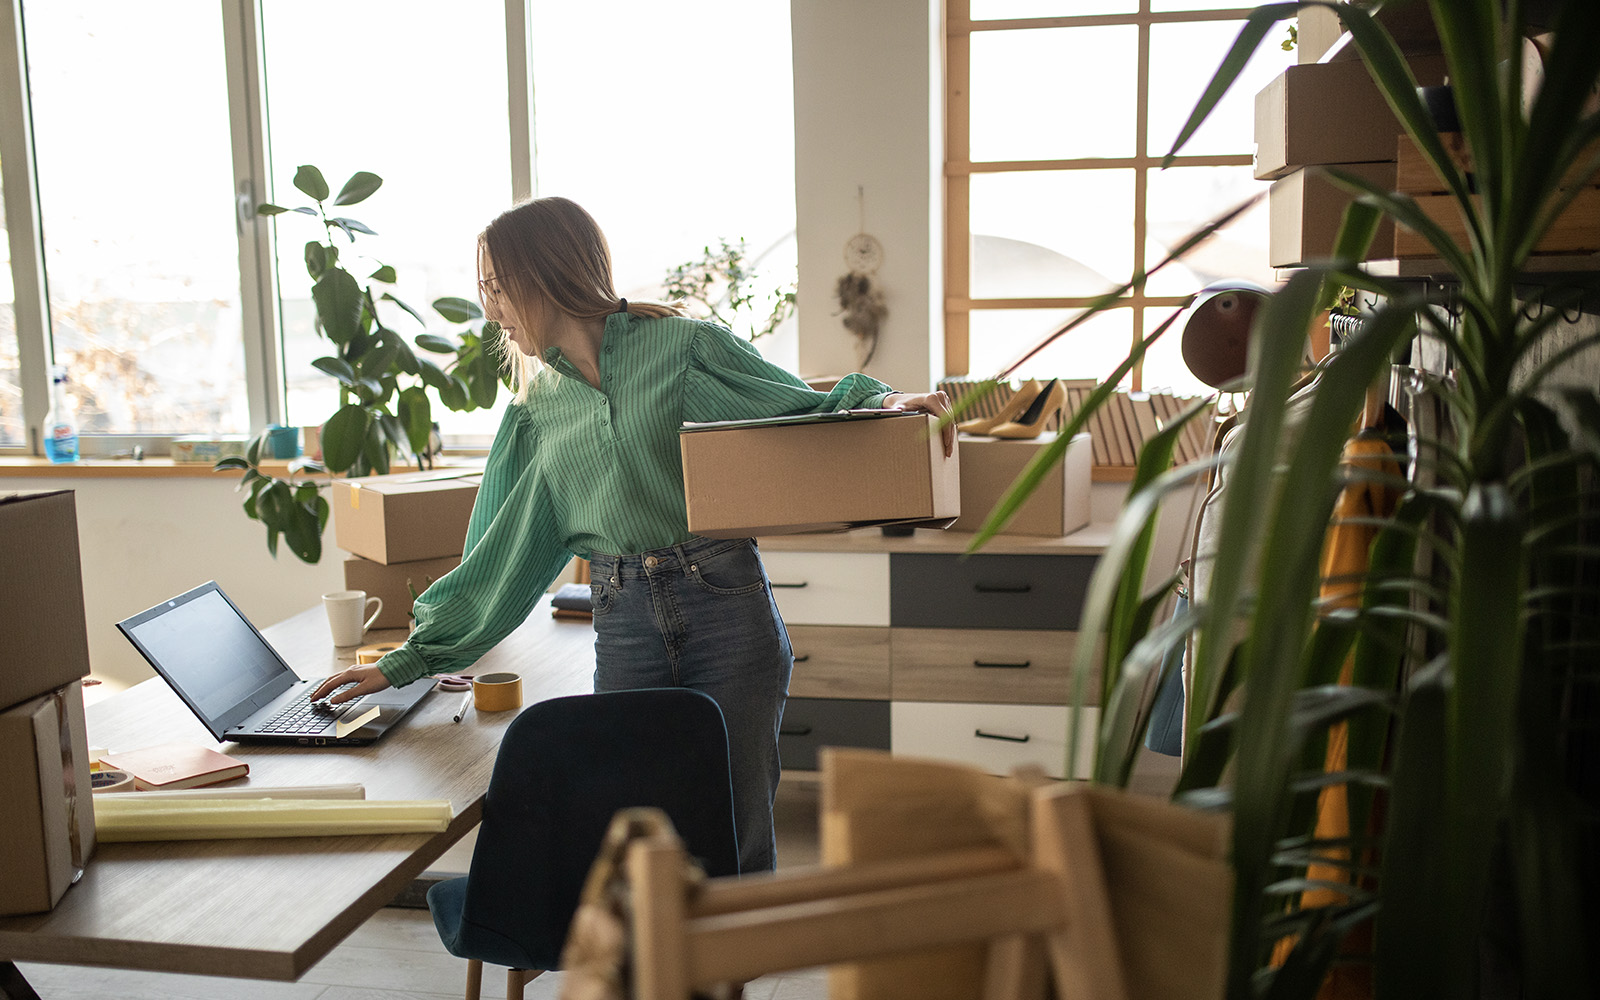 A far-shot of a woman standing at her desk, one hand on her laptop to take care of her ecommerce site. Her other arm holds a box, as if preparing to ship an order. Her office is filled with similar boxes, books, and greenery